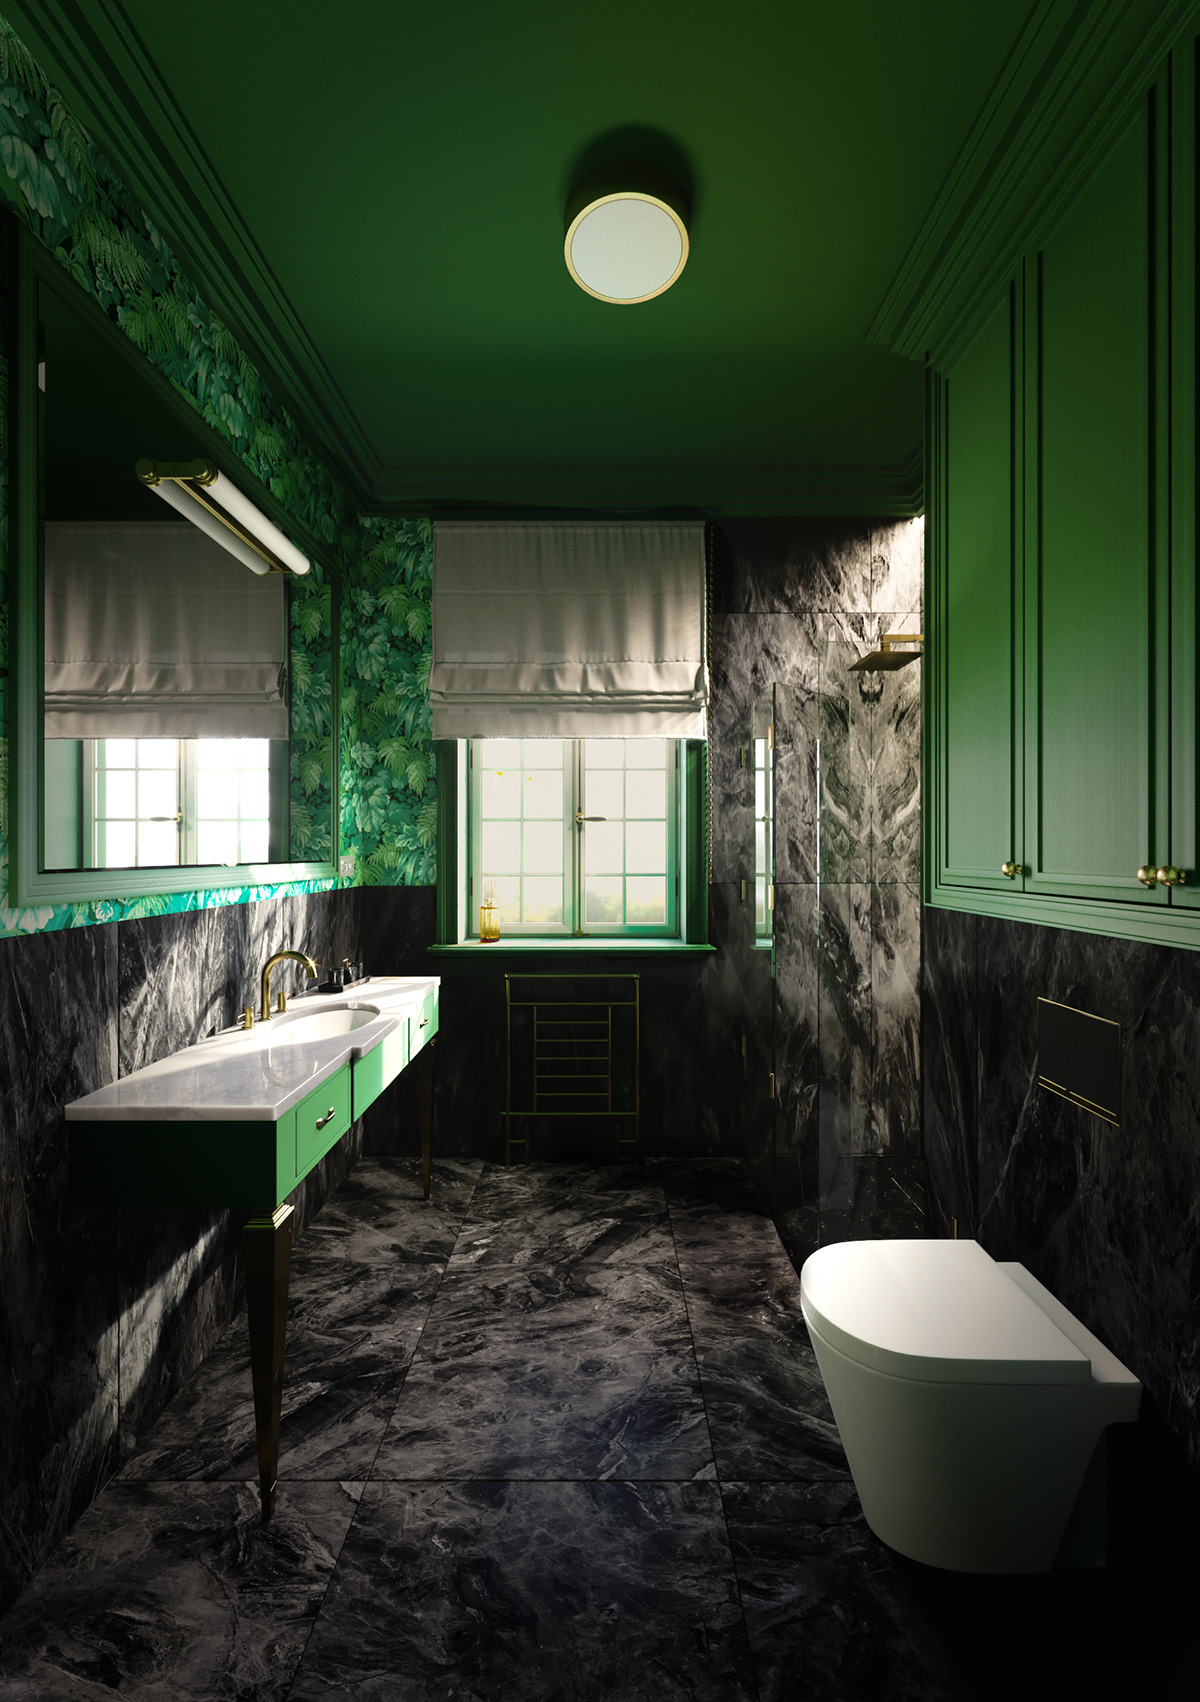 Black and green bathroom décor fashions a room with great depth.